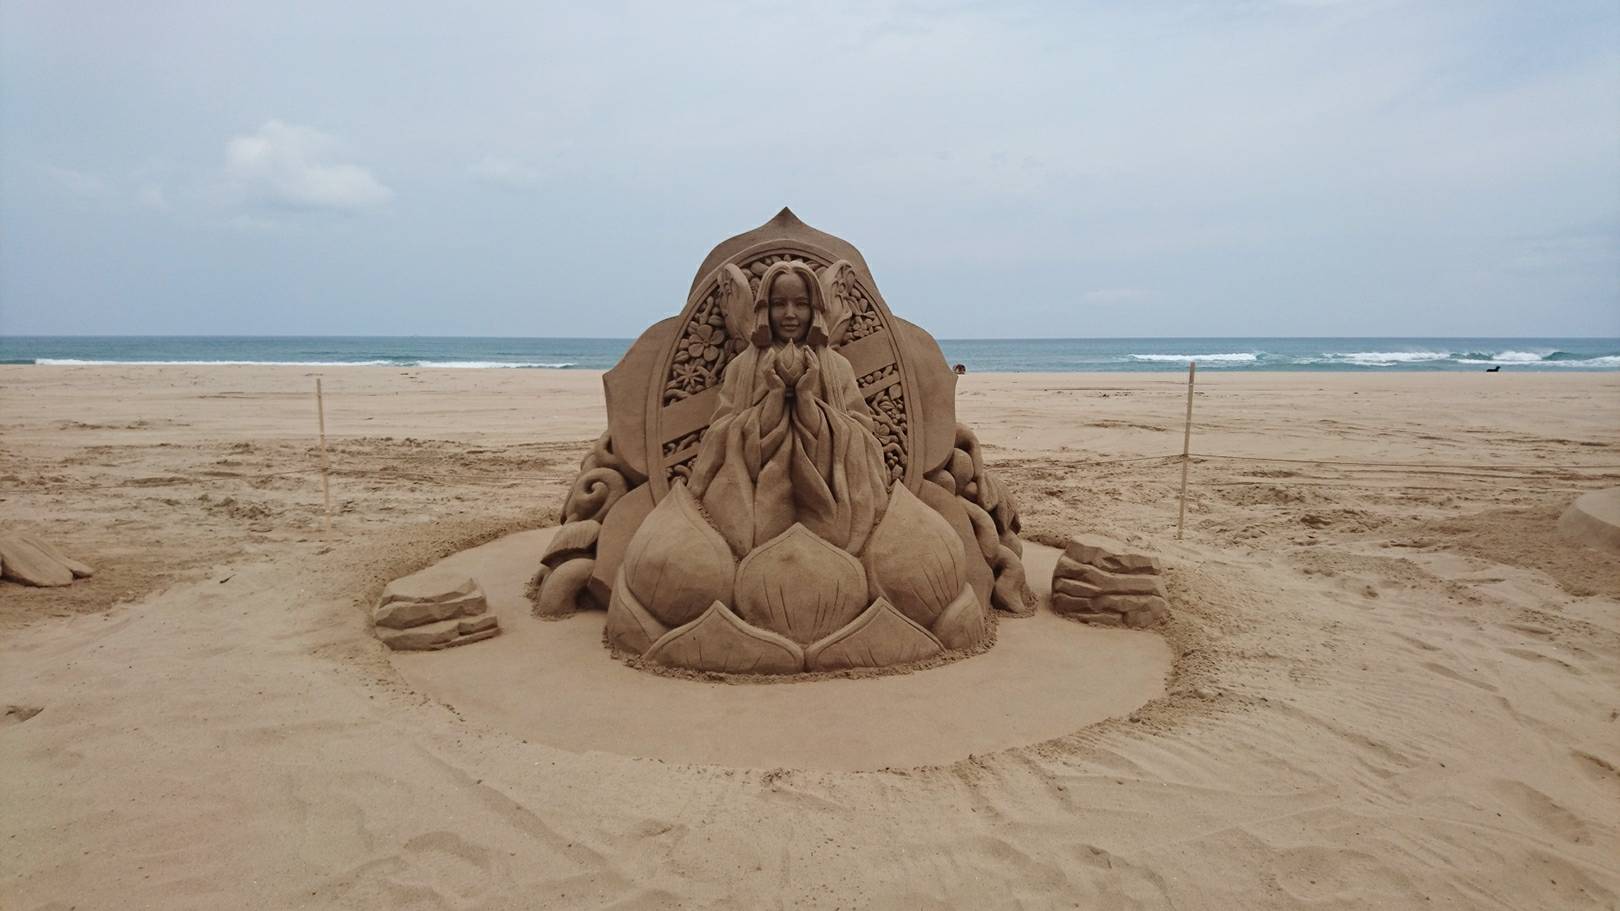 The second work - "The Garden of the Mirror" in the Japanese sand sculpture master